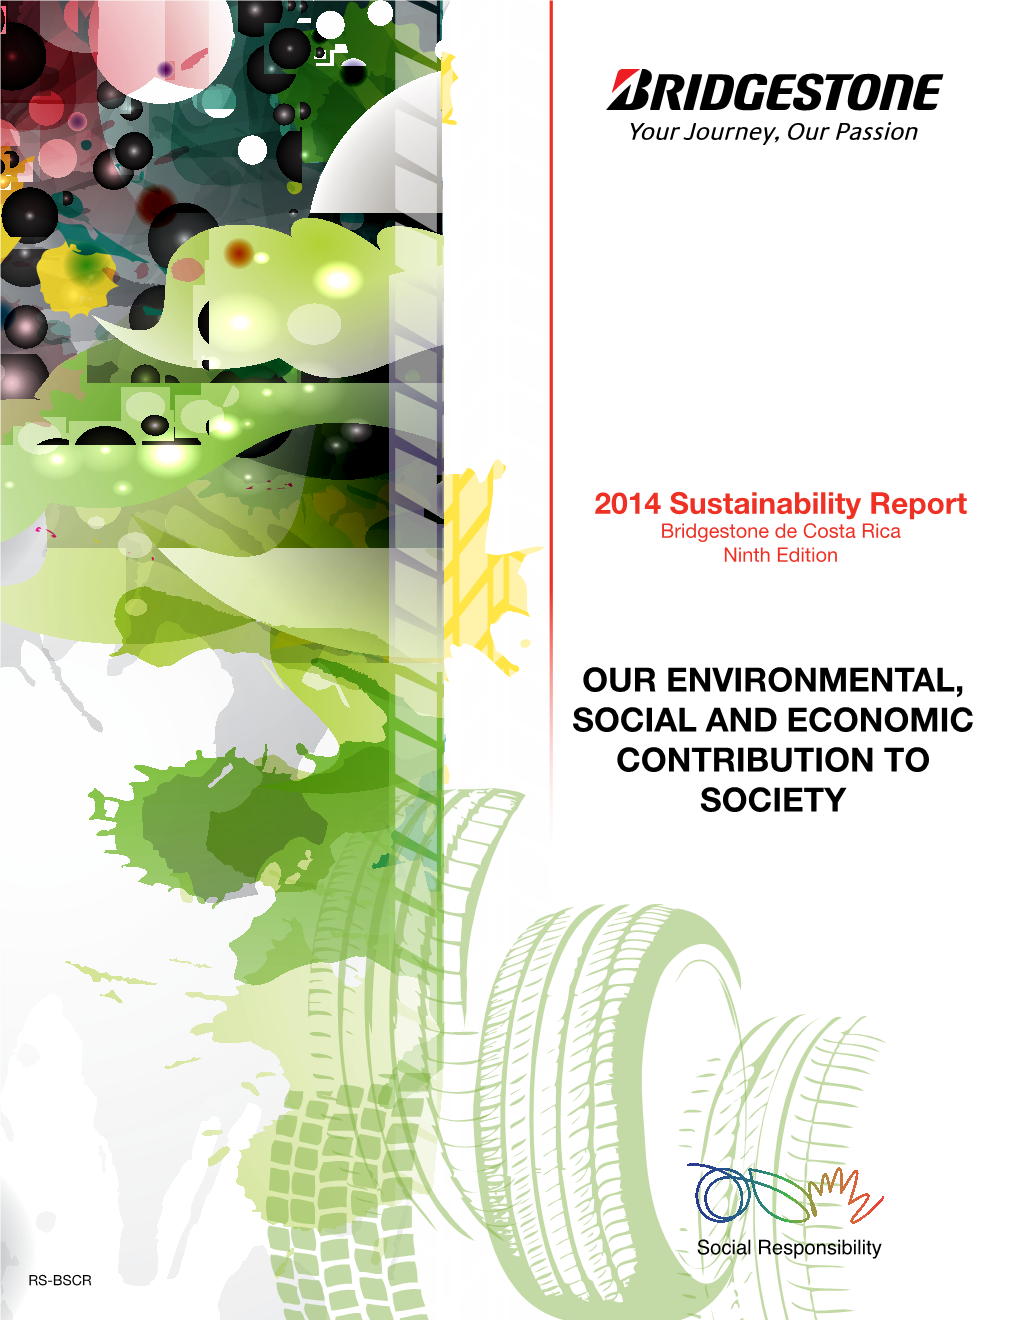 Our Environmental, Social and Economic Contribution to Society